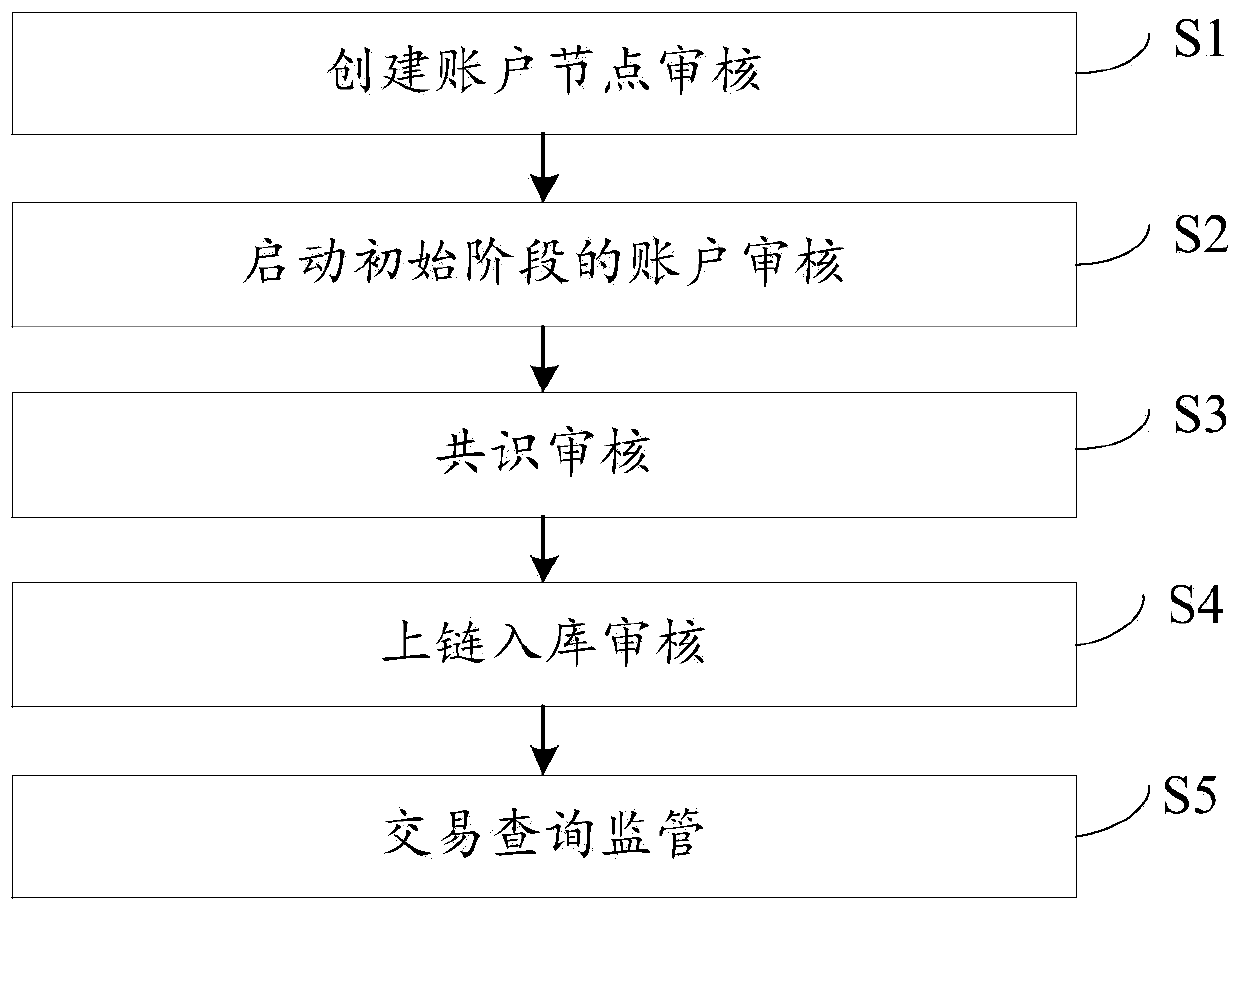 Block chain supervision method and supervision system